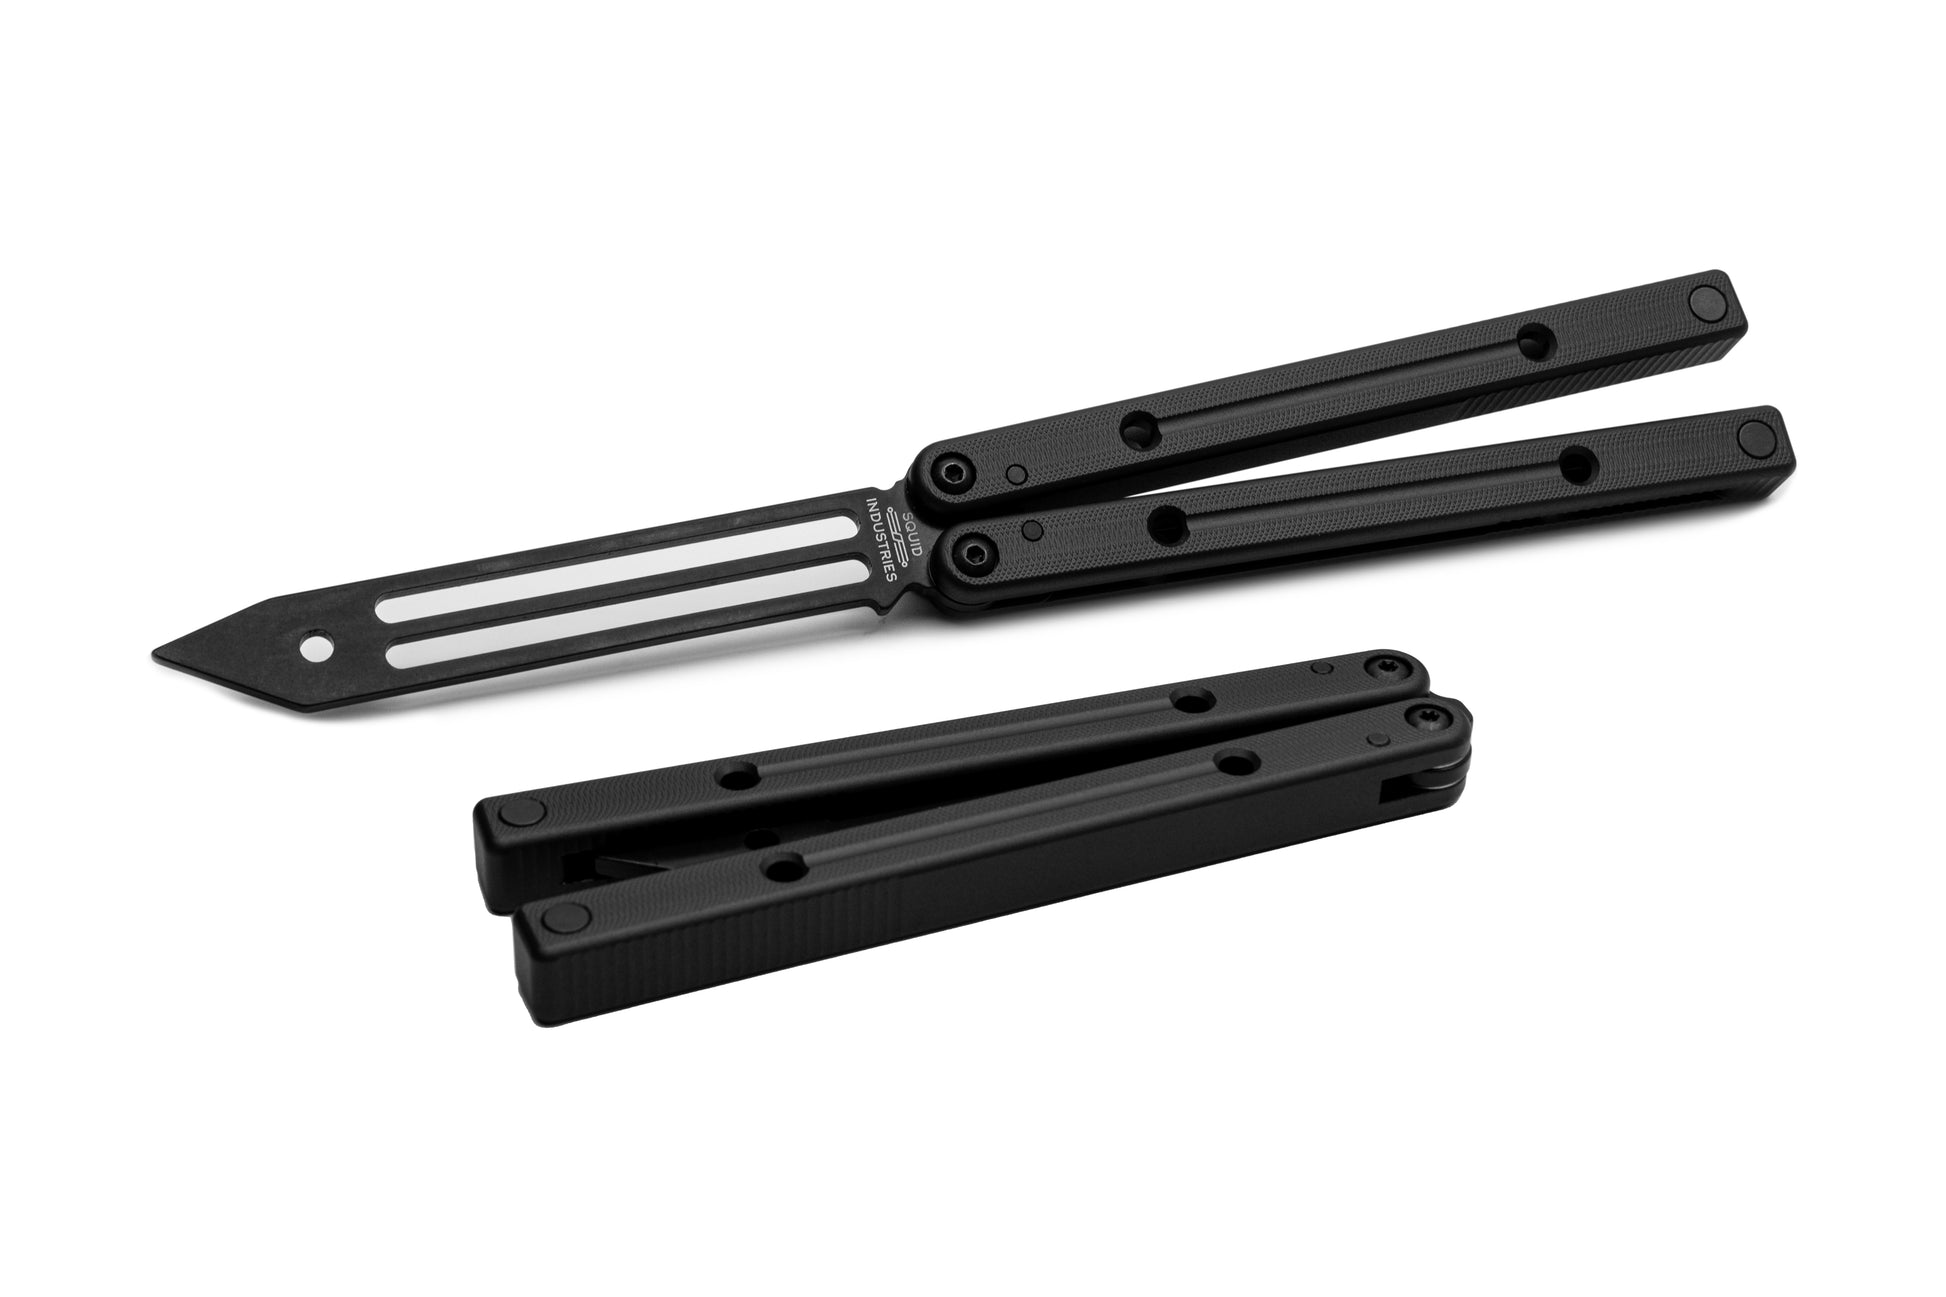 black inked squidtrainer v4 butterfly knife trainer balisong